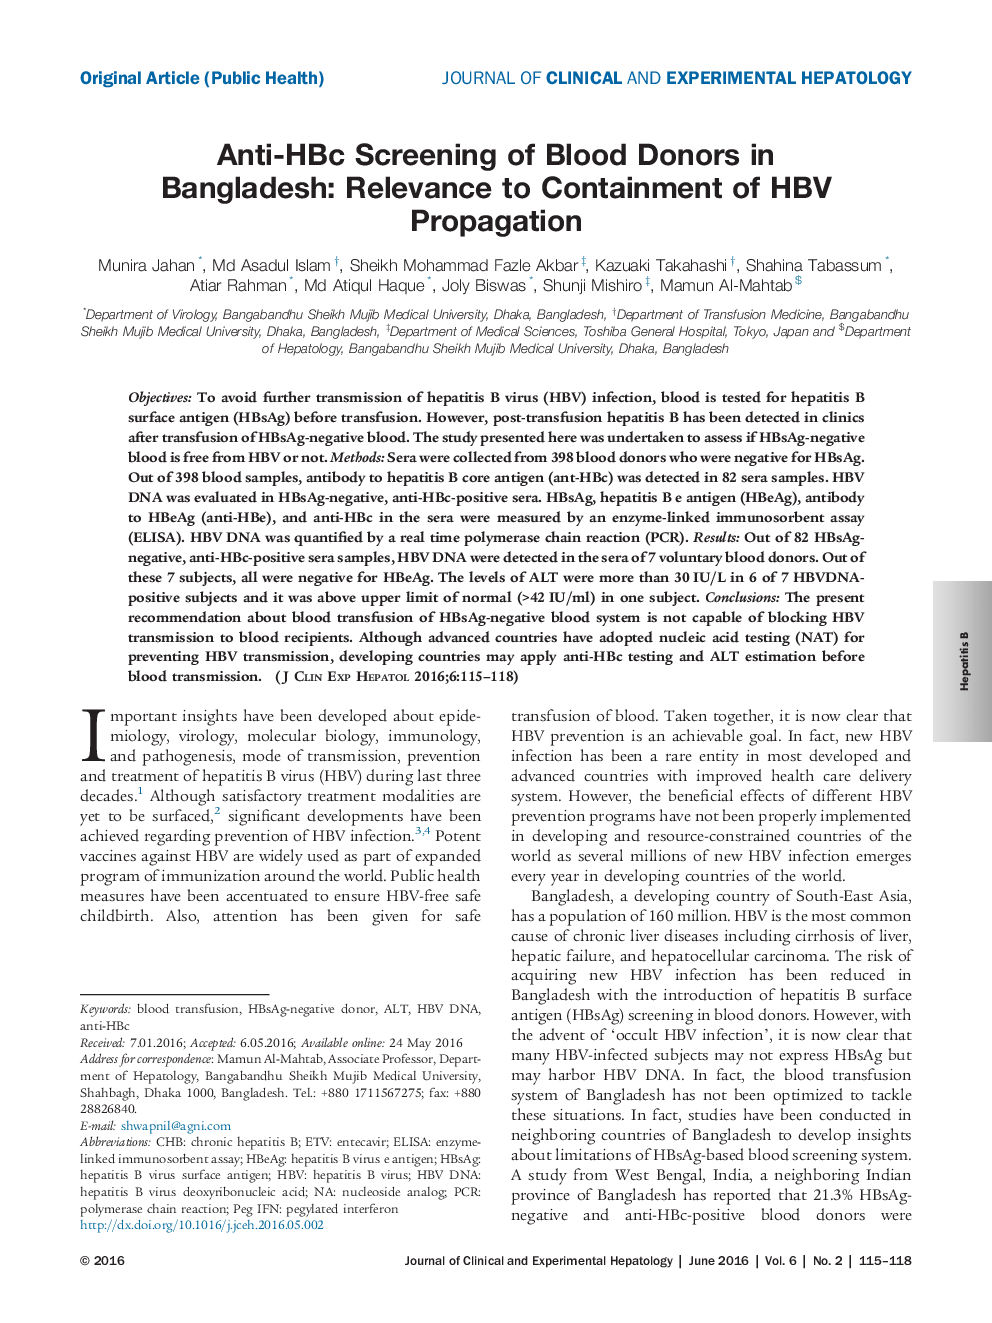 Anti-HBc Screening of Blood Donors in Bangladesh: Relevance to Containment of HBV Propagation